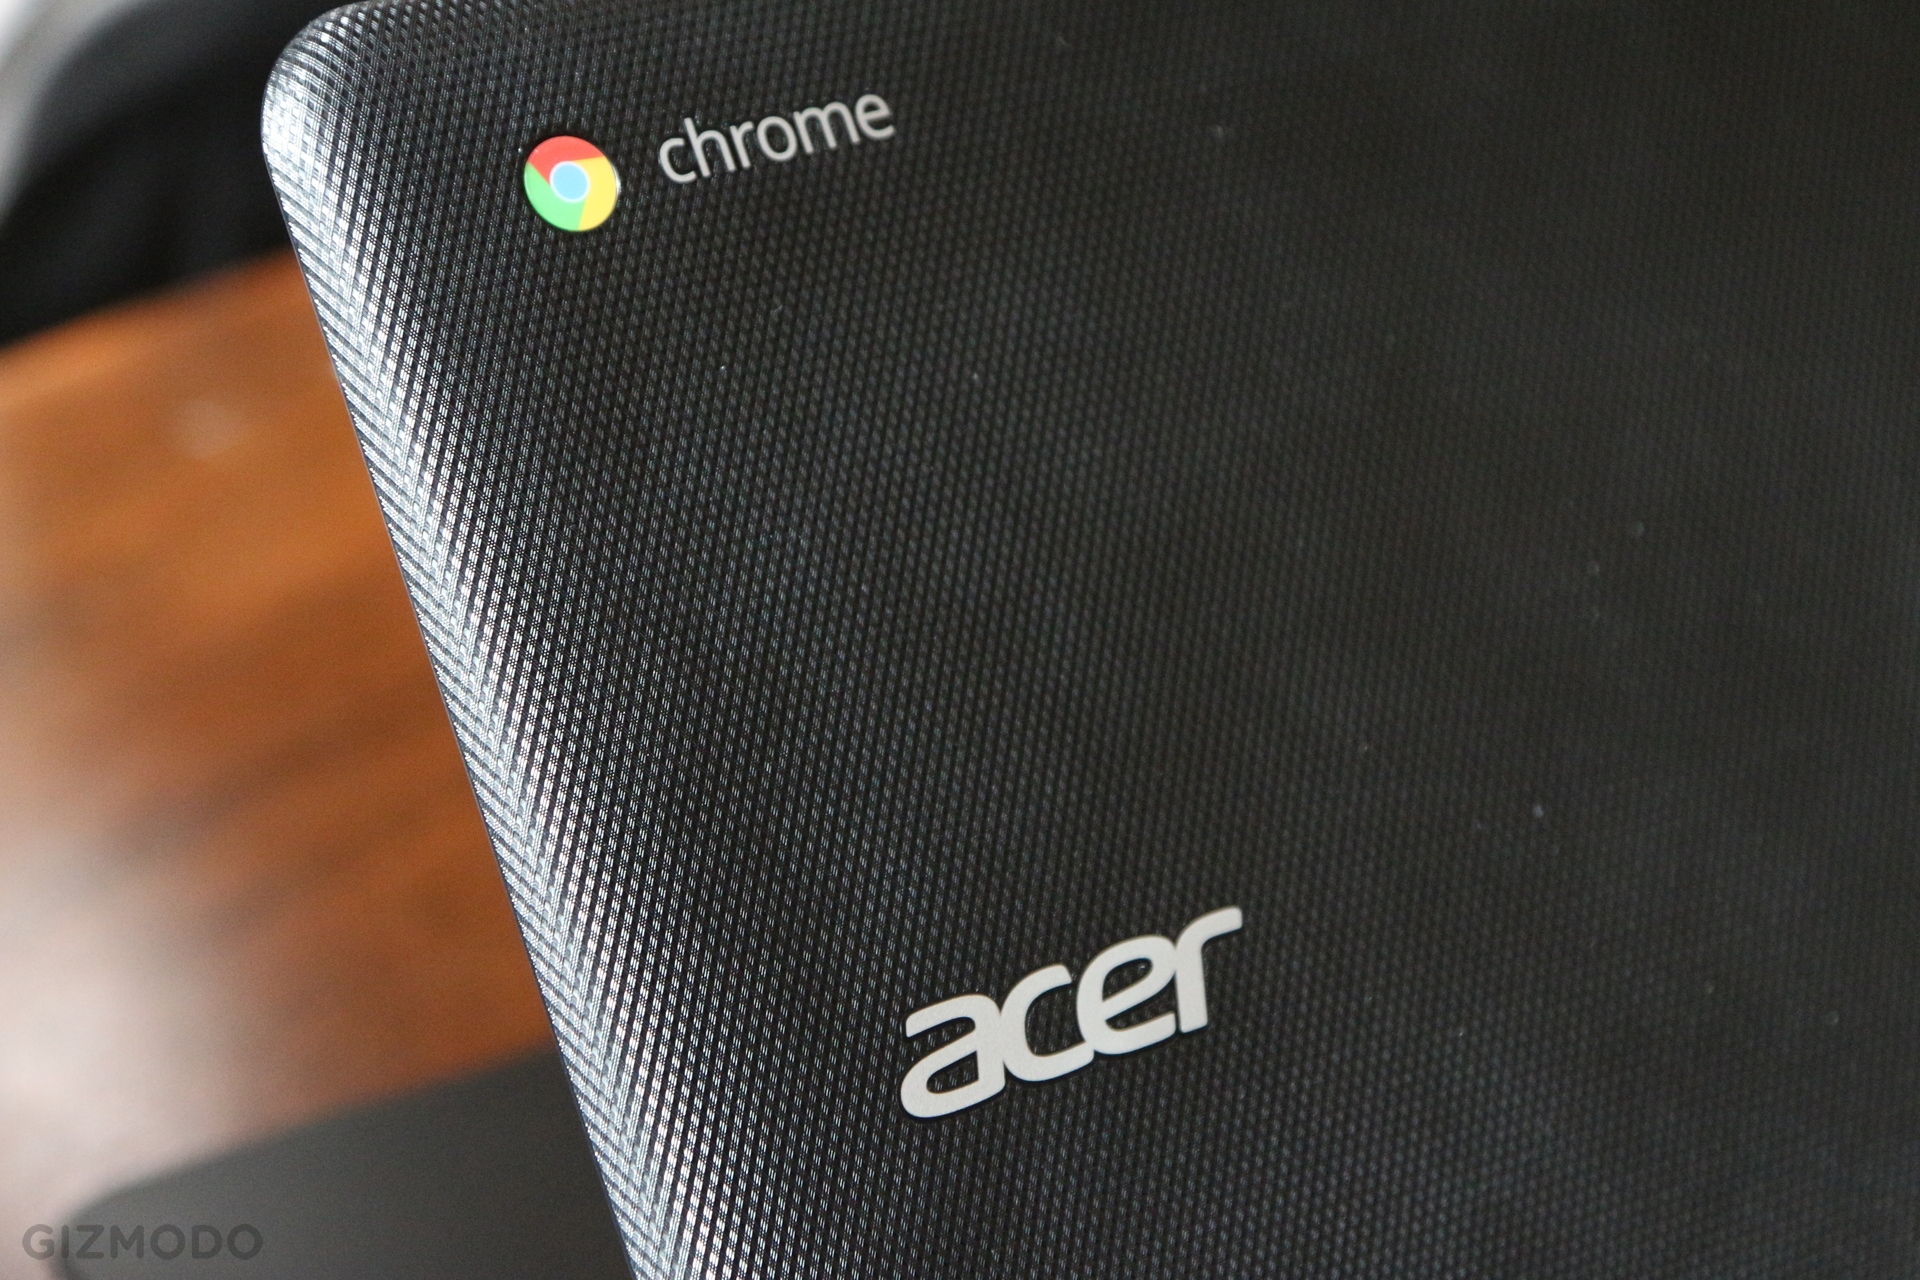 Acer Chromebook 15 Hands-On: Super Solid Big Screen Browsing For $US250